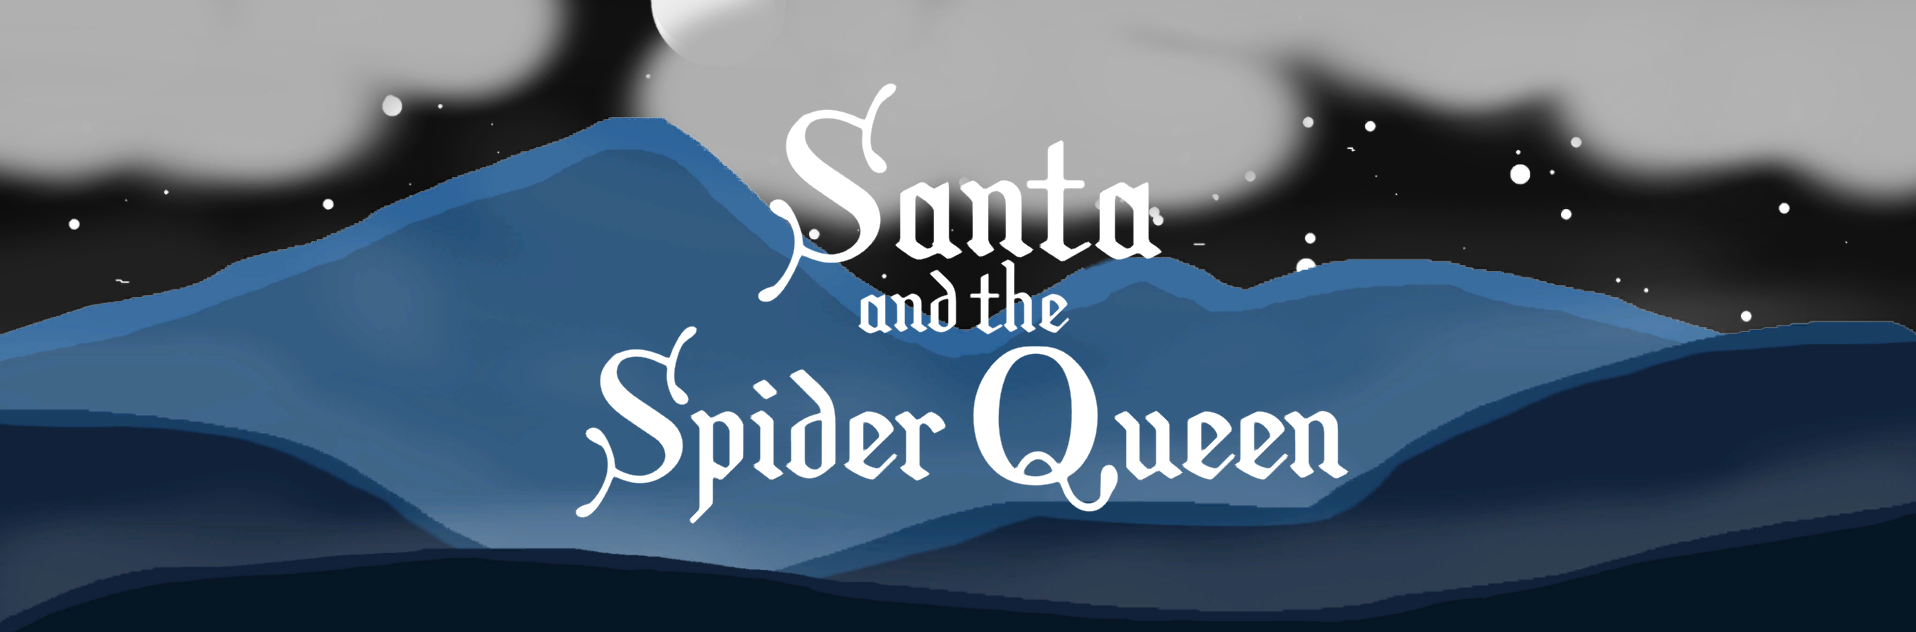 Santa and the Spider Queen